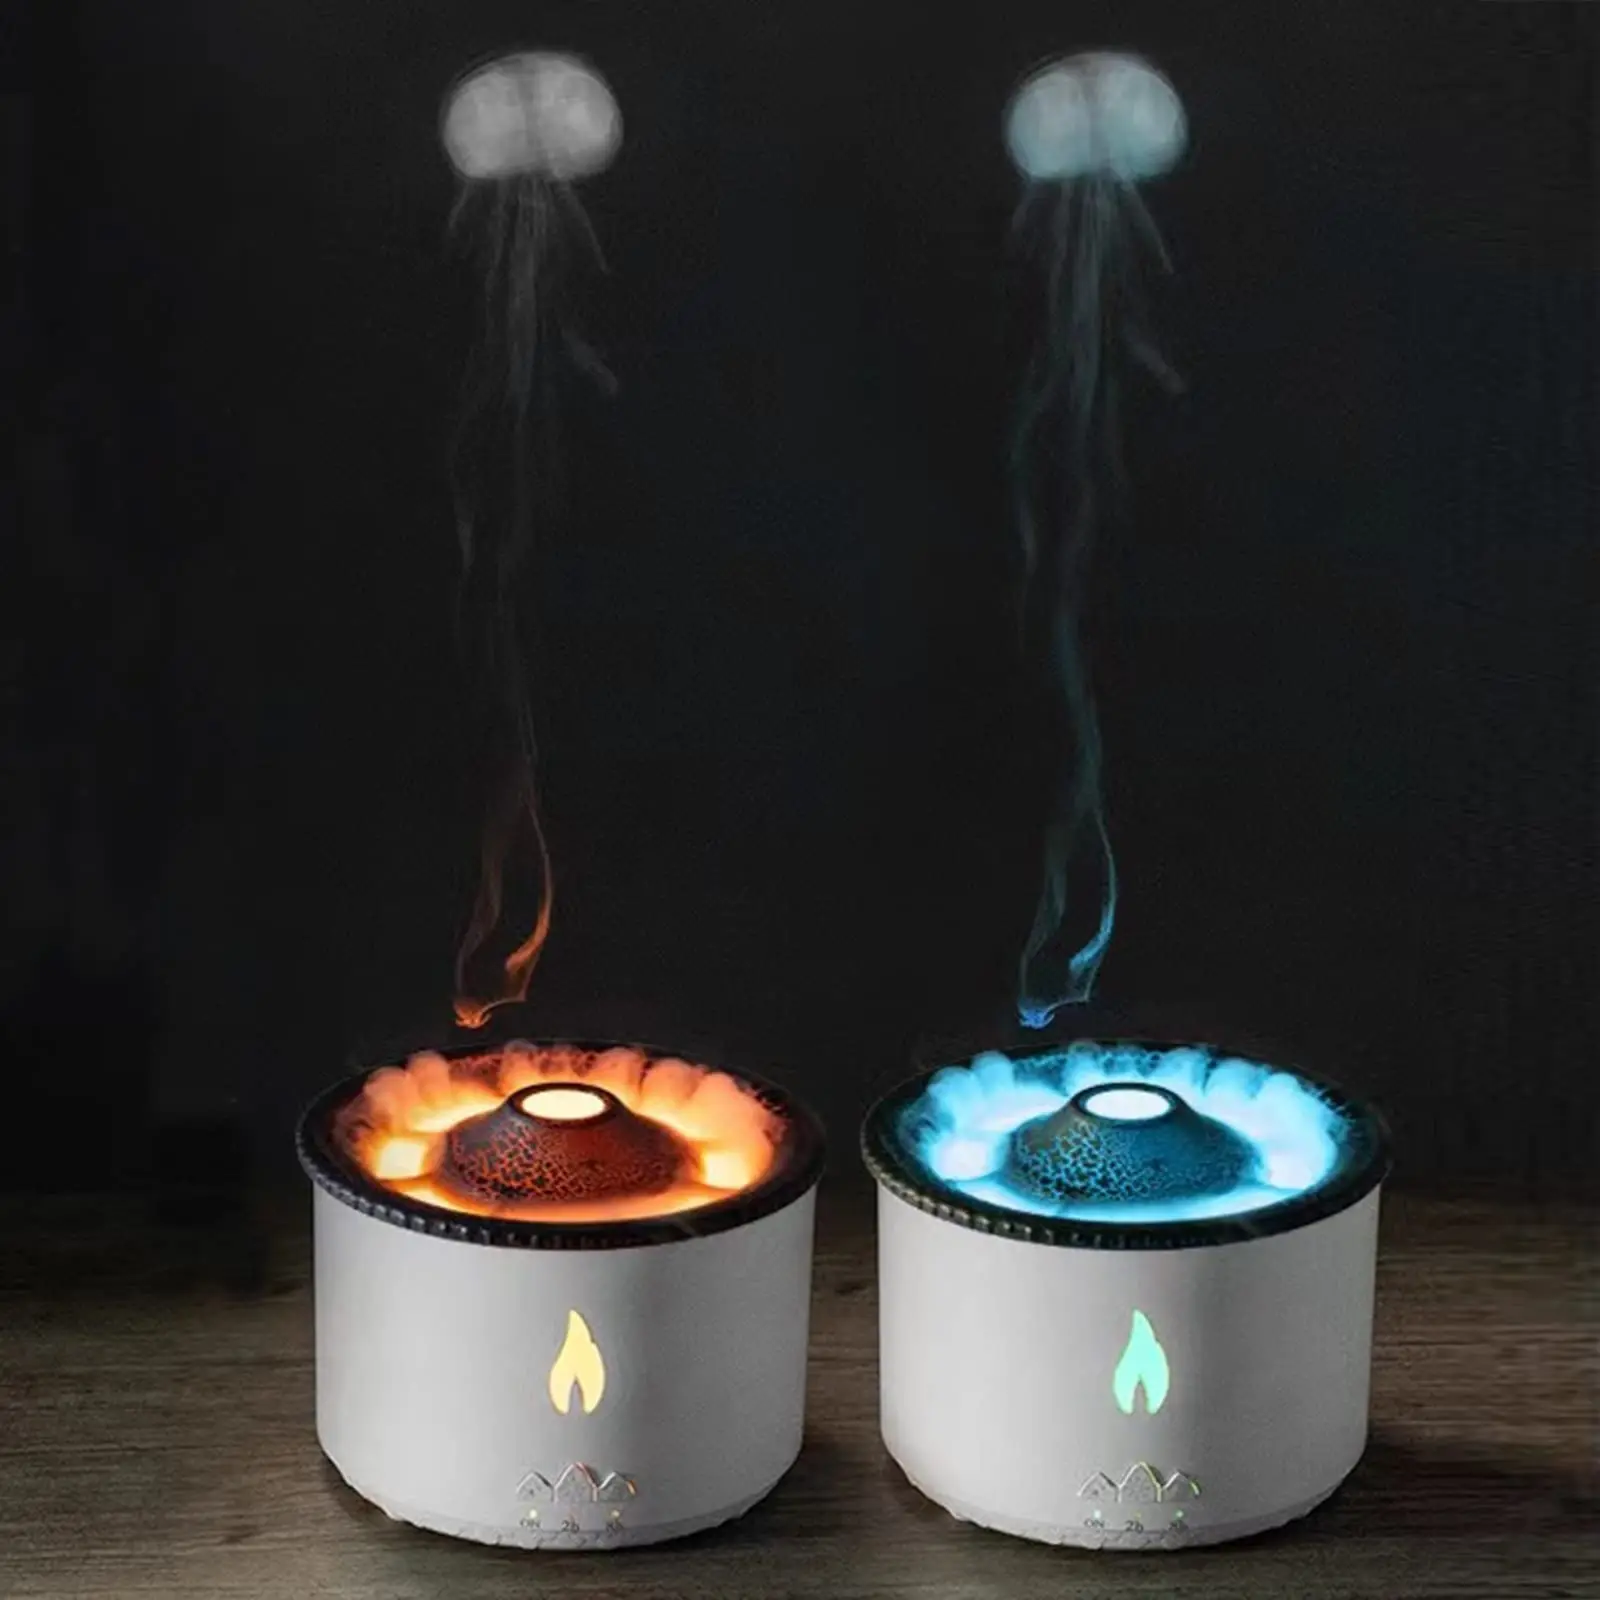 

360ML Volcanic Flame Aroma Oil Diffuser USB Air Humidifier Ultrasonic Portable Jellyfish Smoke Ring Fire Sprayer for Bedroom Car